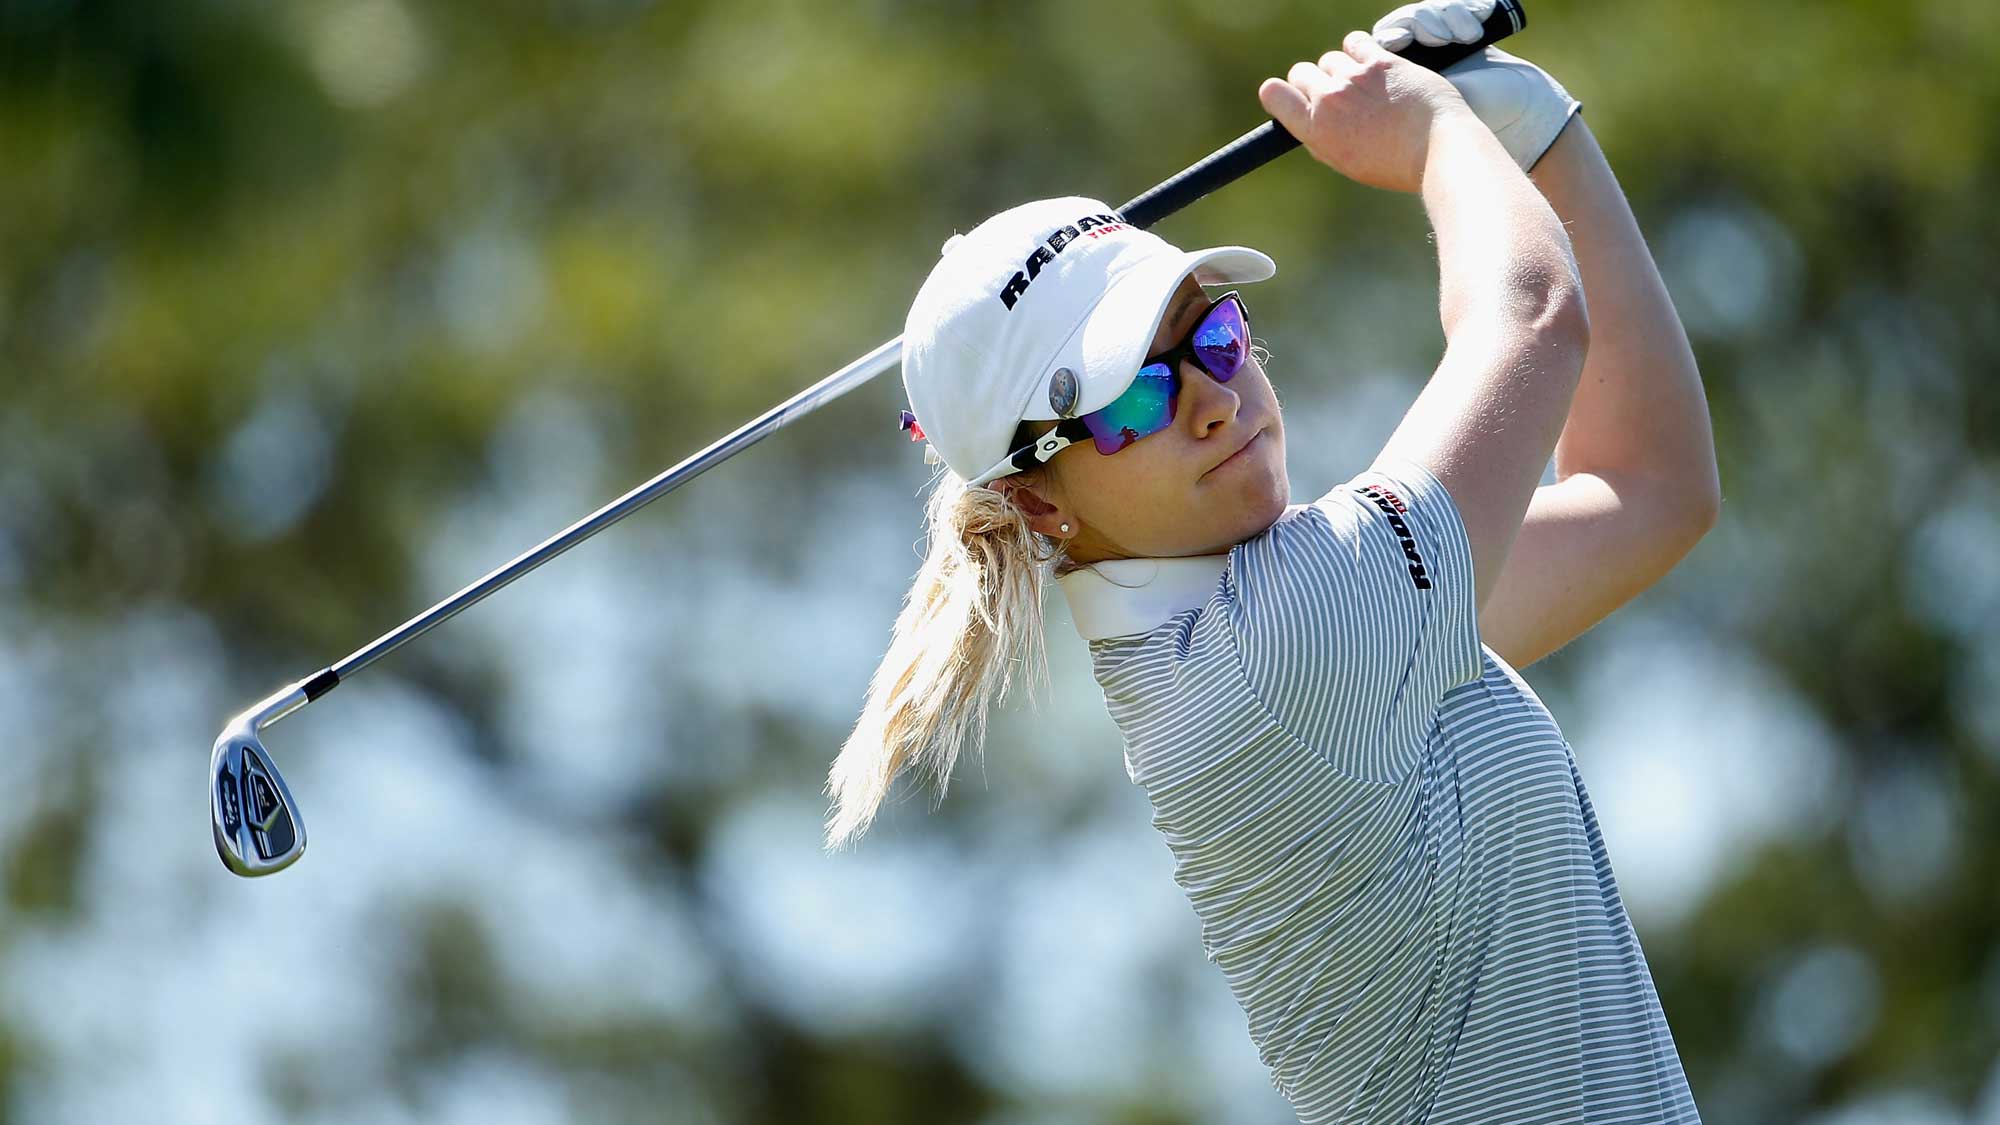 Jodi Ewart Shadoff of England plays a tee shot on the eighth hole during the second round of the LPGA LOTTE Championship